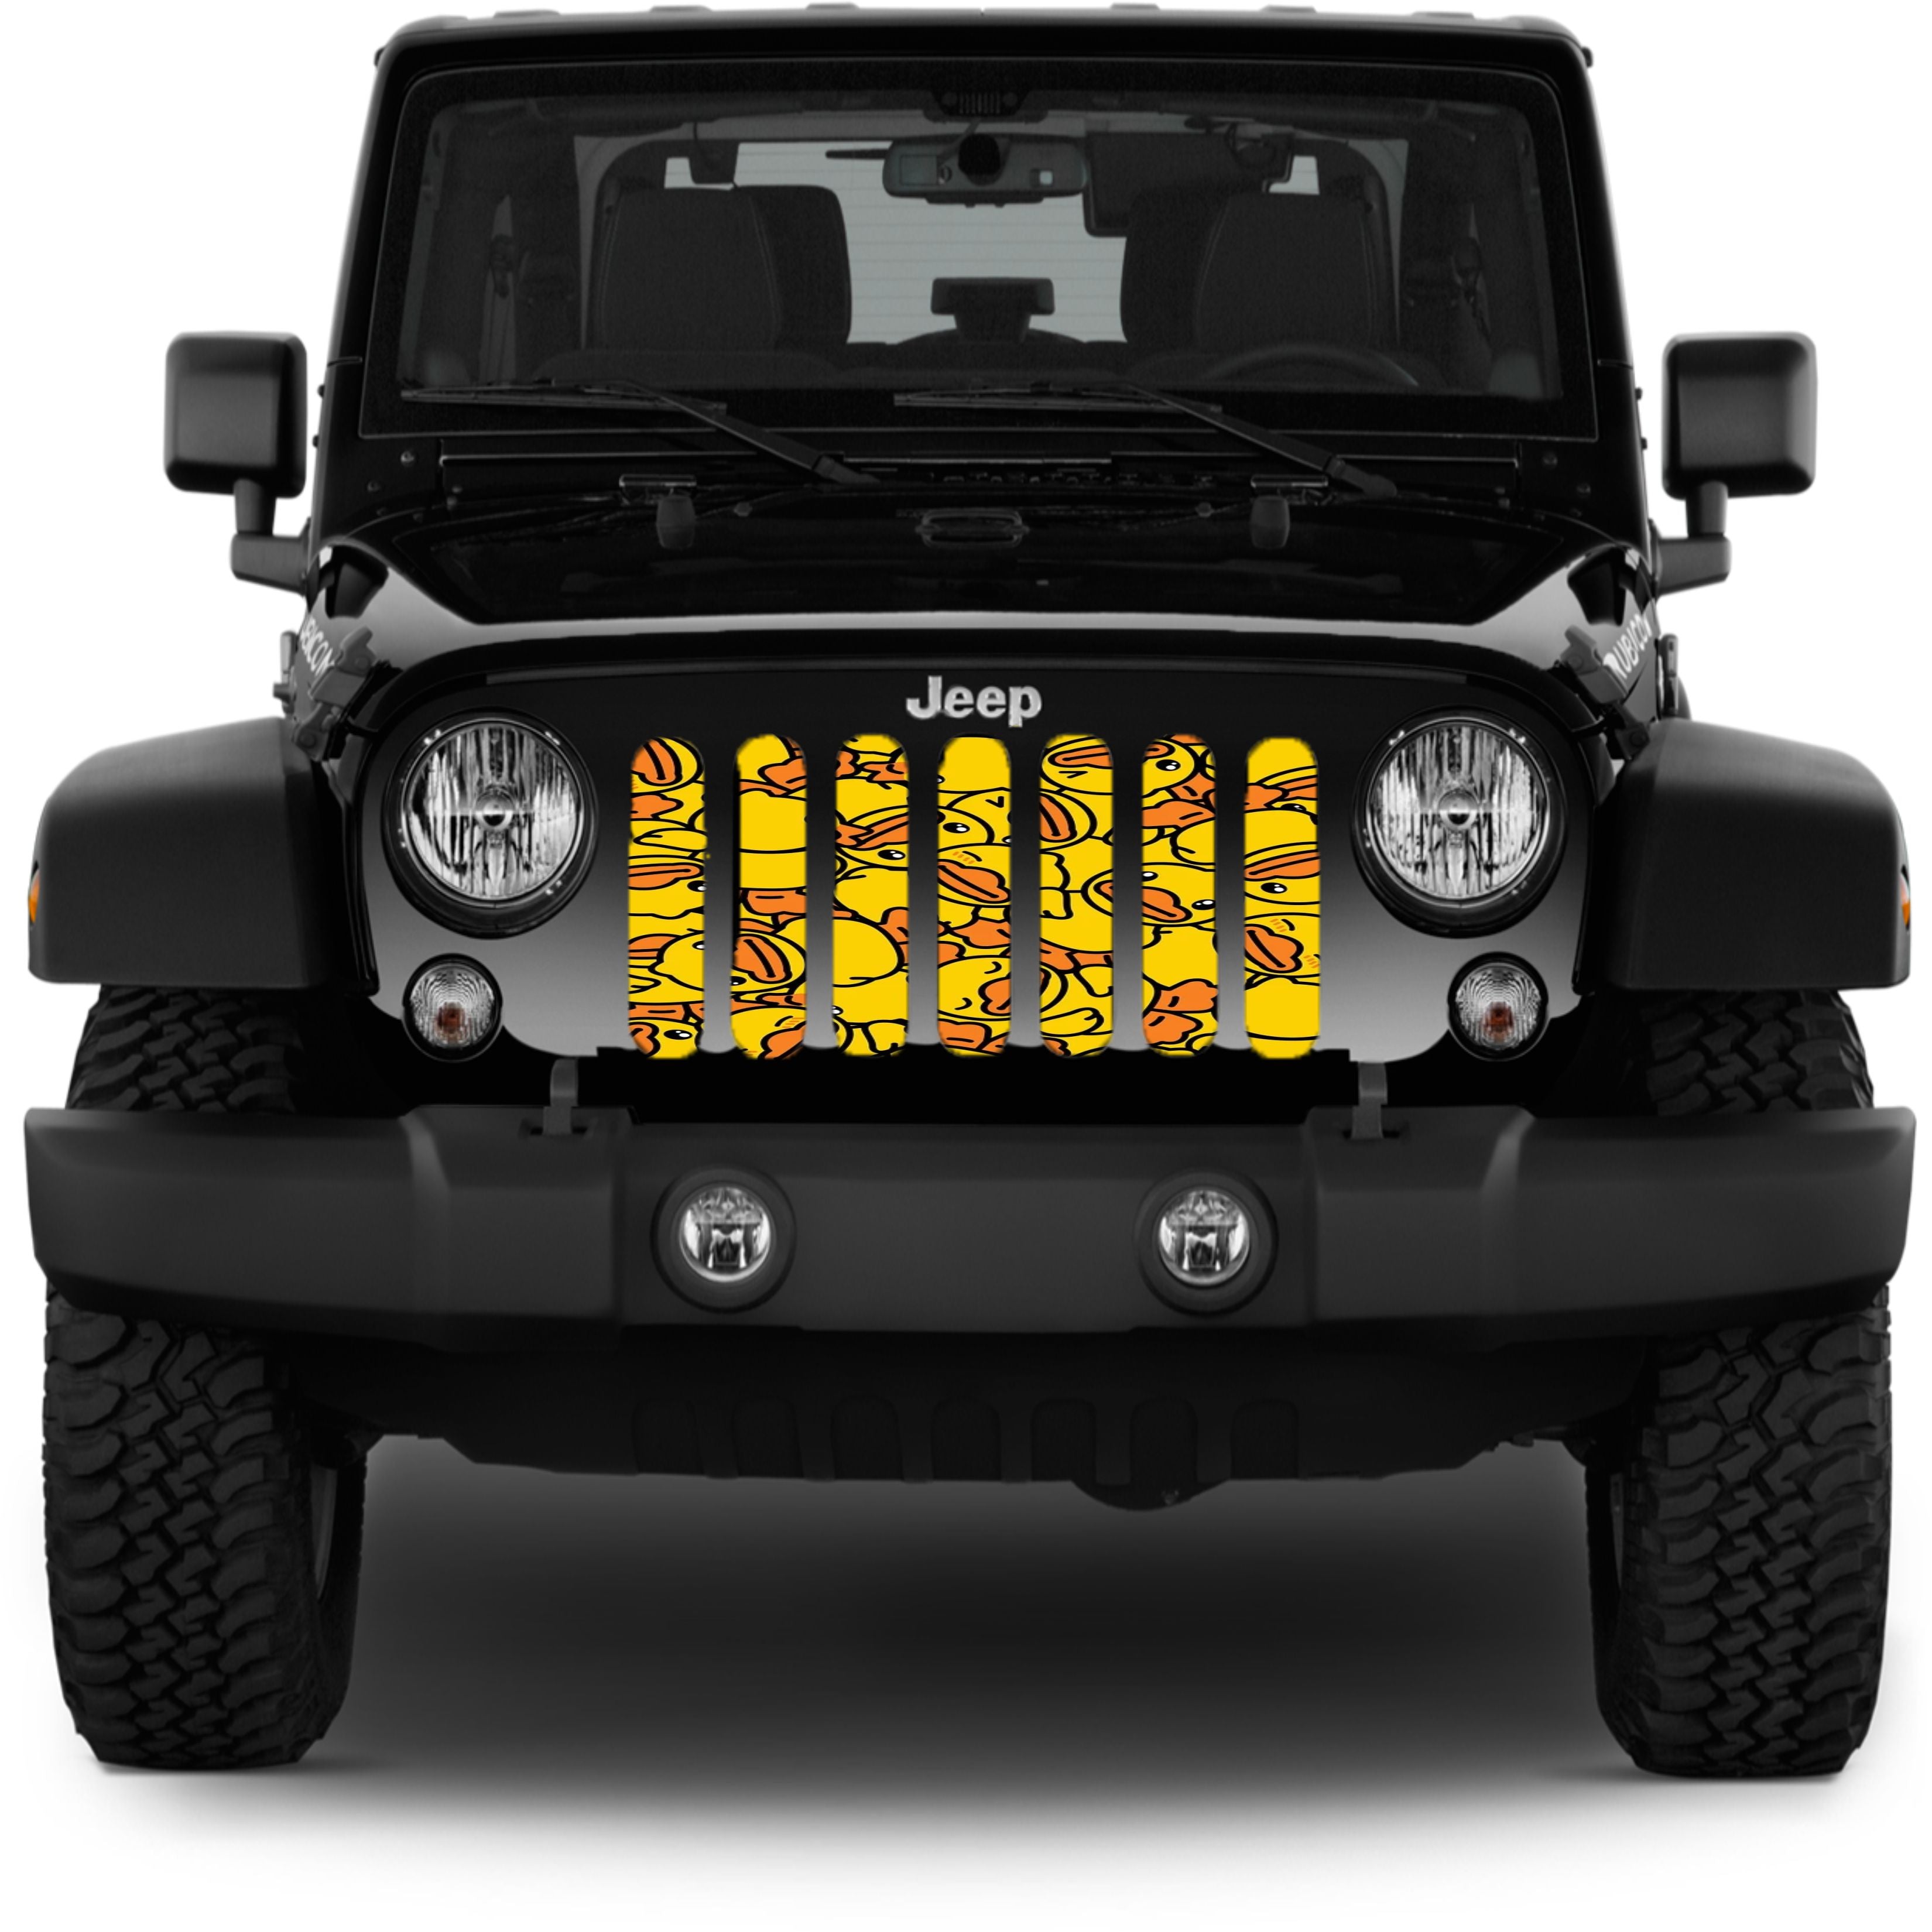 A Badling of Rubber Ducks Jeep Grille Insert